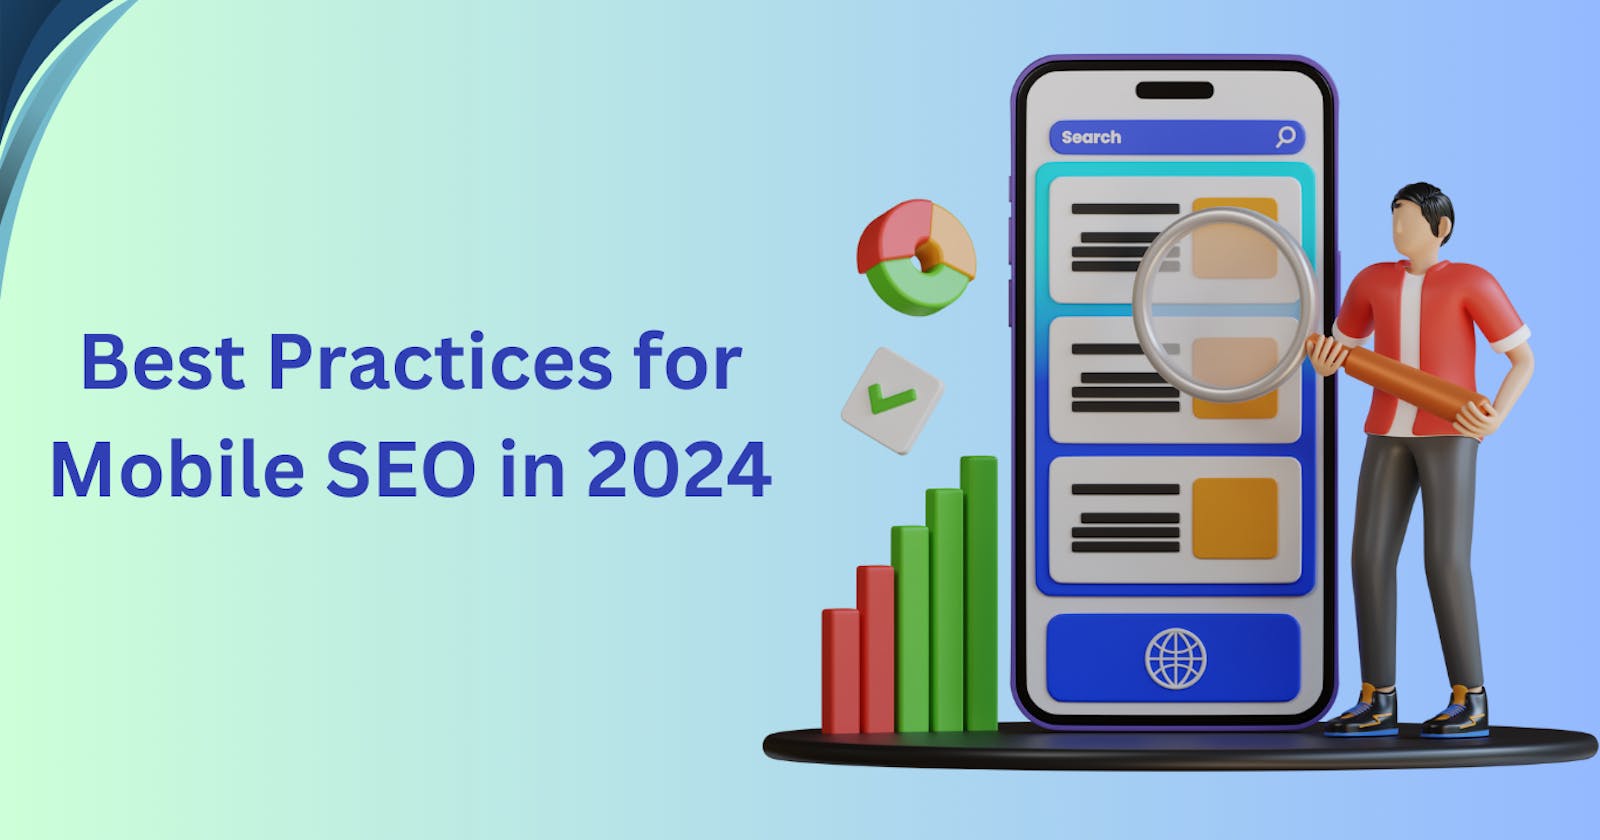 What Are The Best Practices for Mobile SEO in 2024?